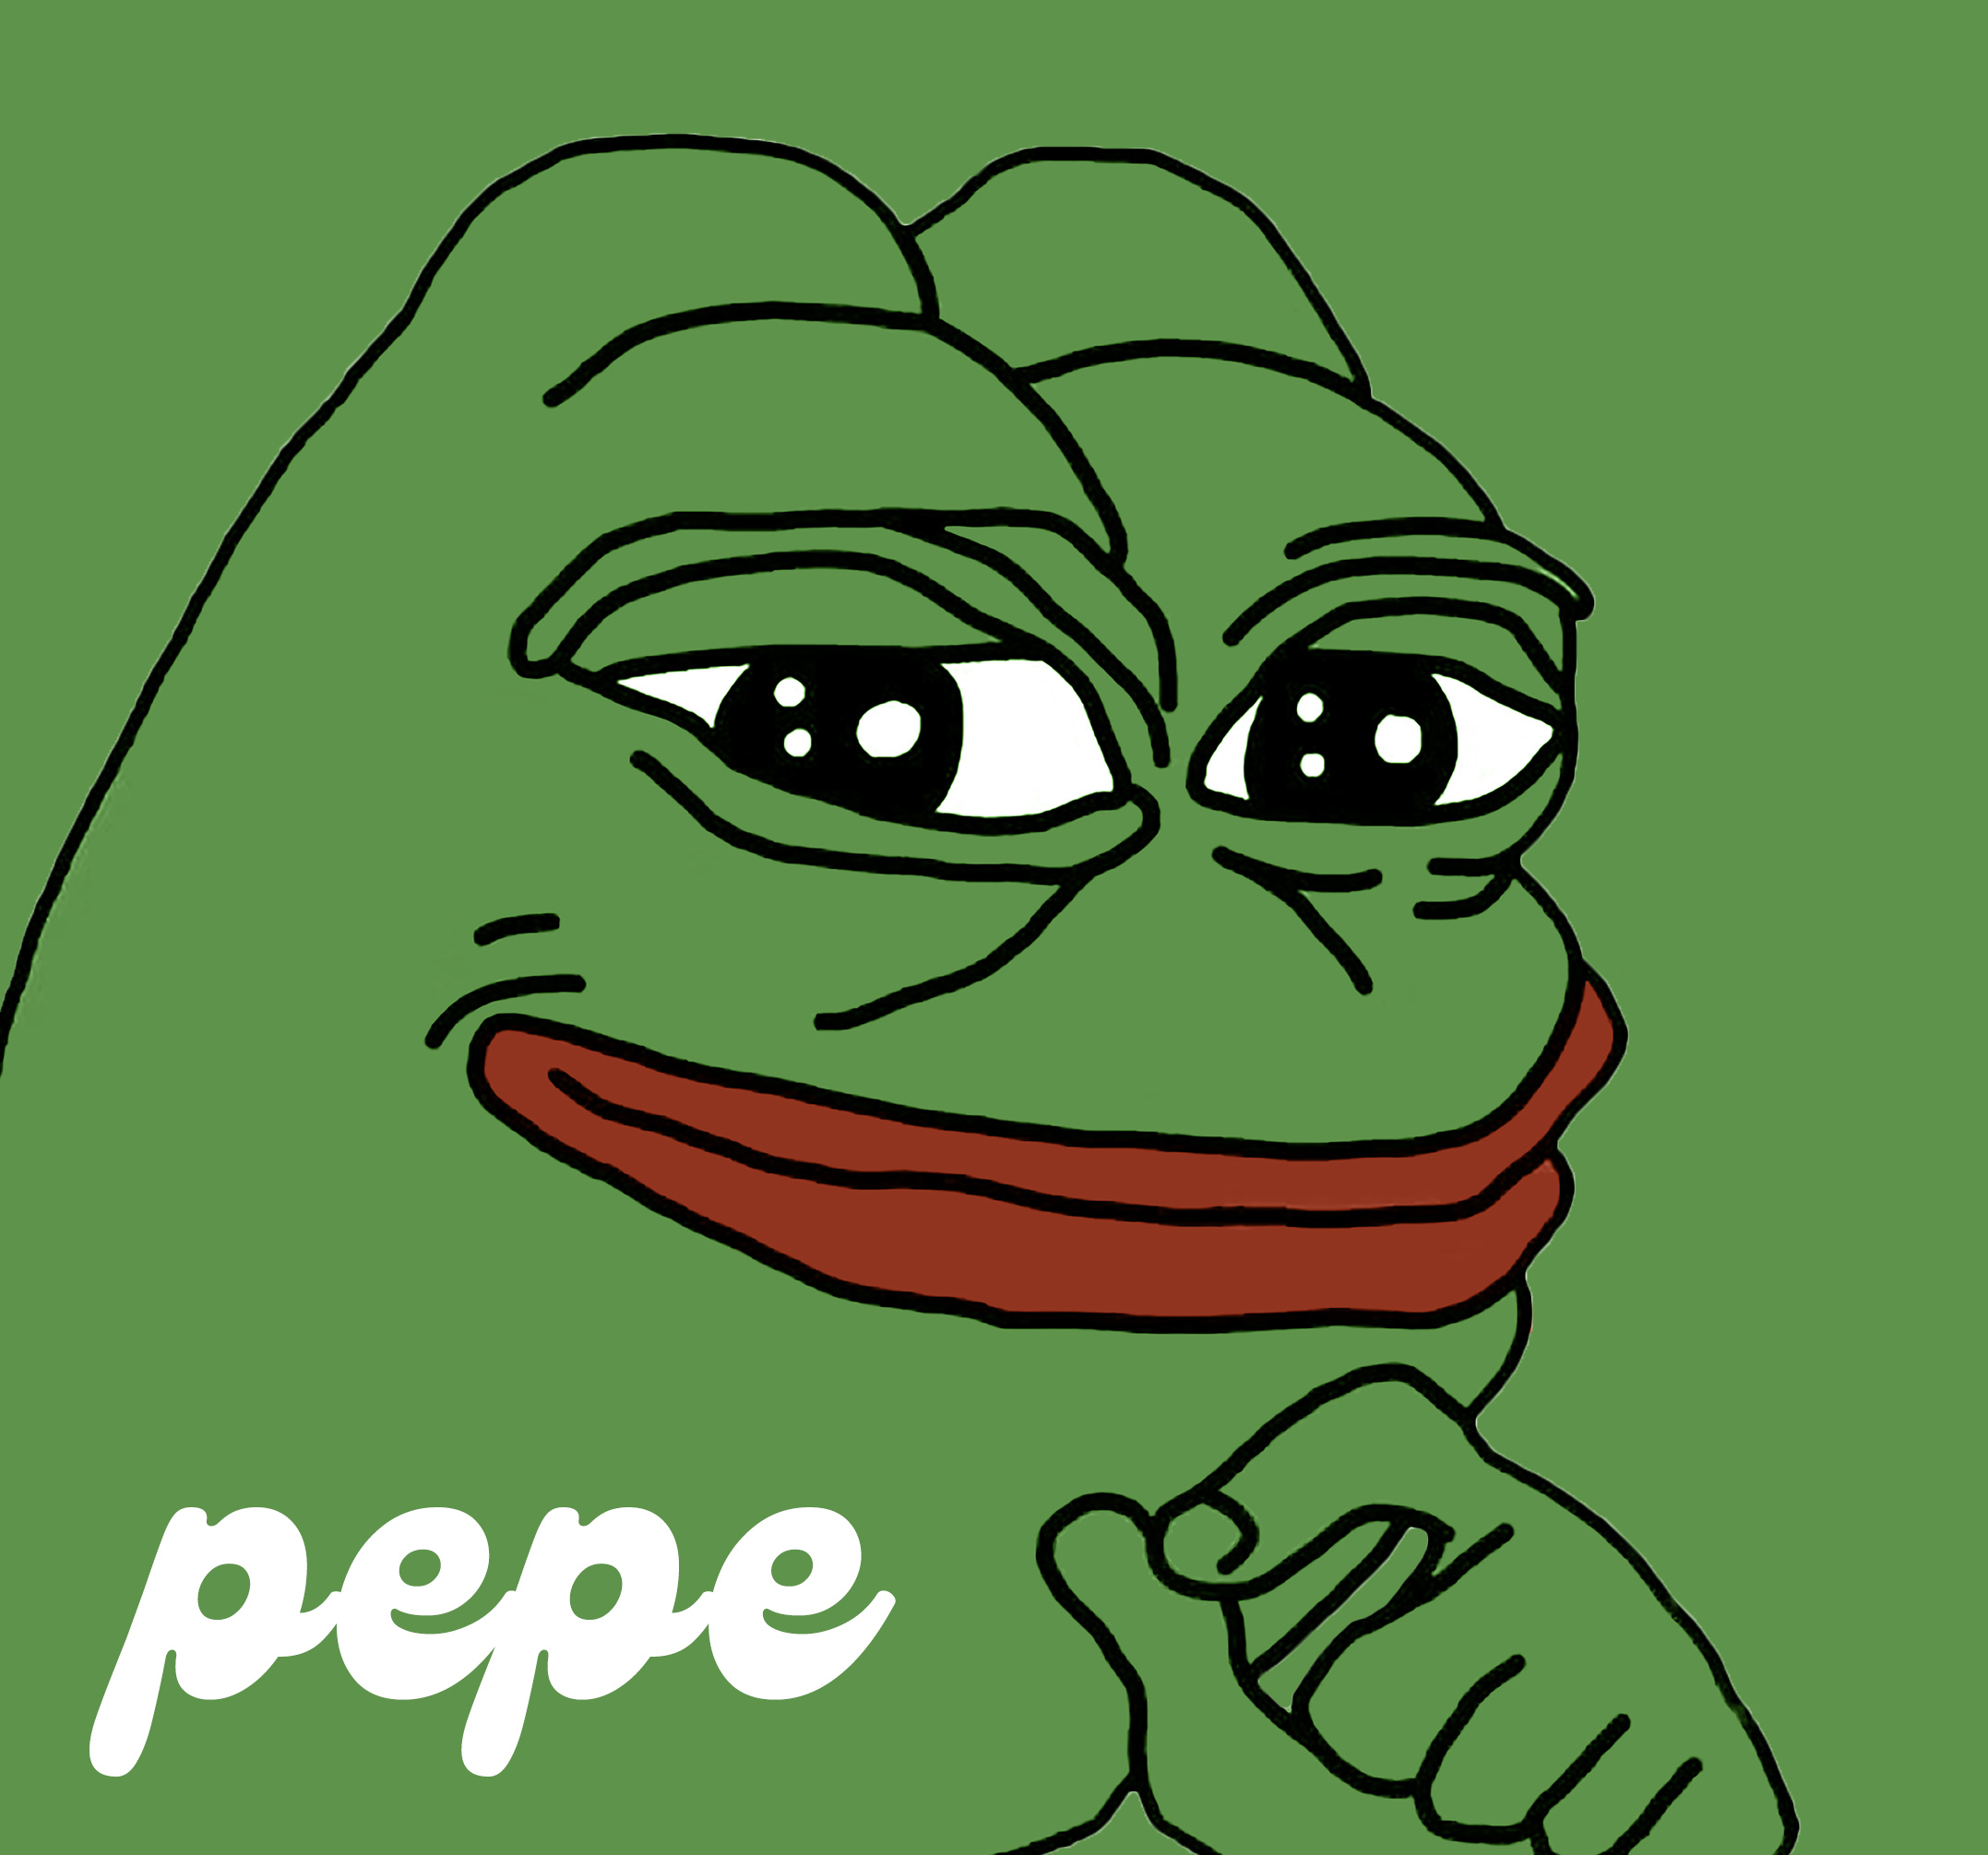 Pepe Coin Continues to Slide Despite the Ripple Ruling. Can the Frog Bounce Back?